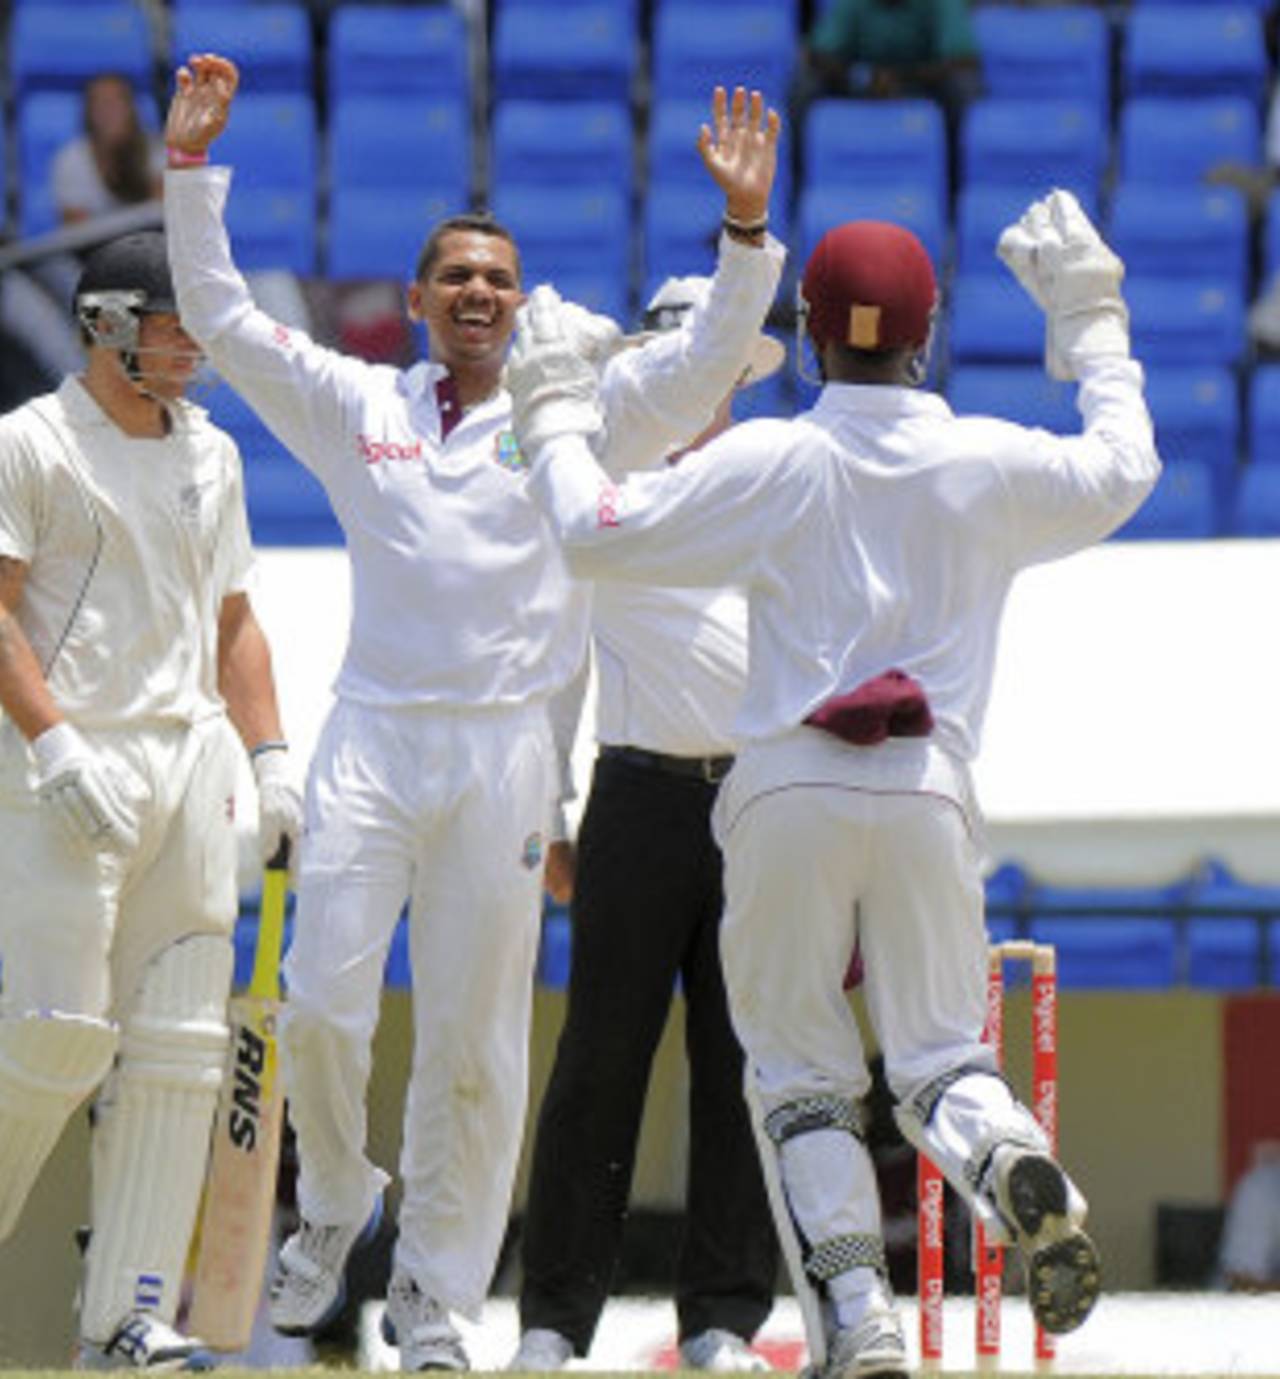 Sunil Narine has been rest his fingers over the past few days after a heavy workload in the first Test&nbsp;&nbsp;&bull;&nbsp;&nbsp;DigicelCricket.com/Brooks LaTouche Photography